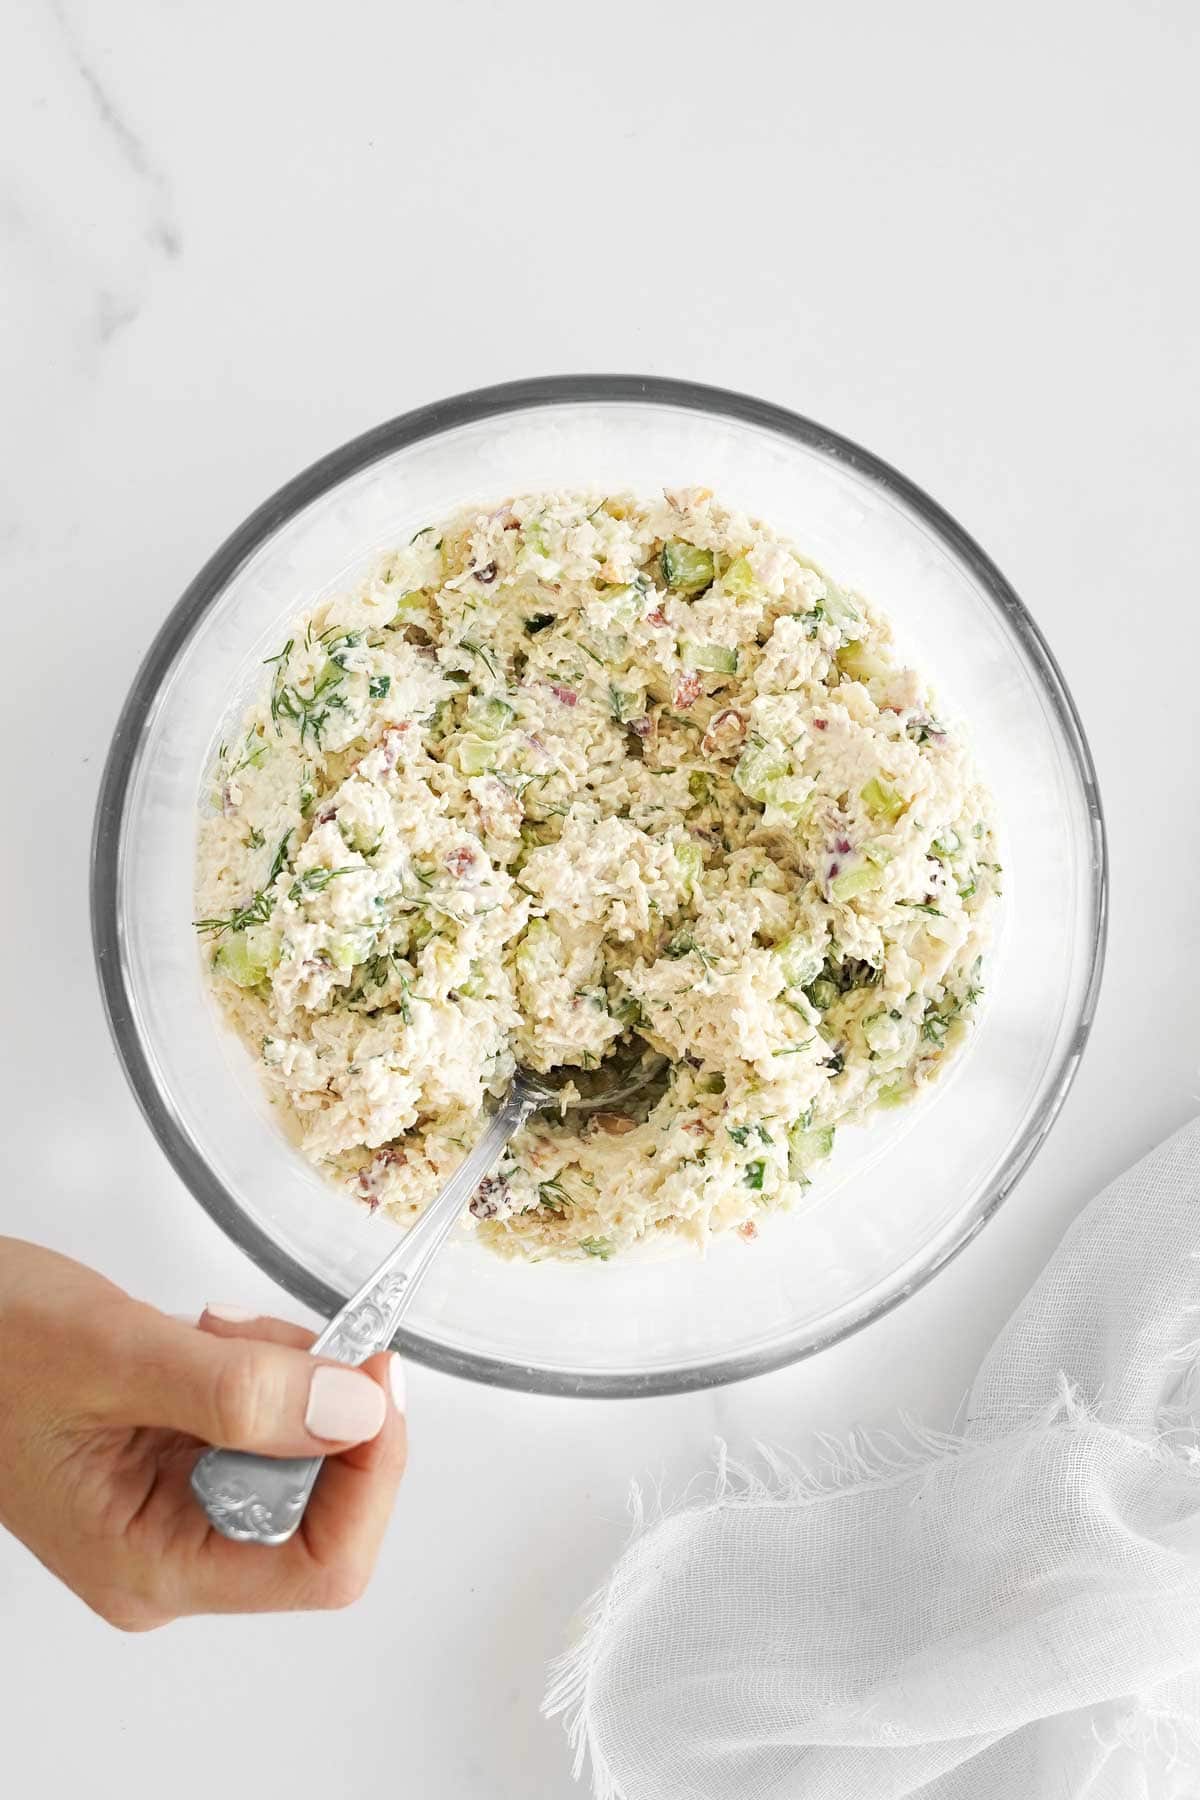 A bowl of creamy chicken salad with a hand mixing it using a spoon.